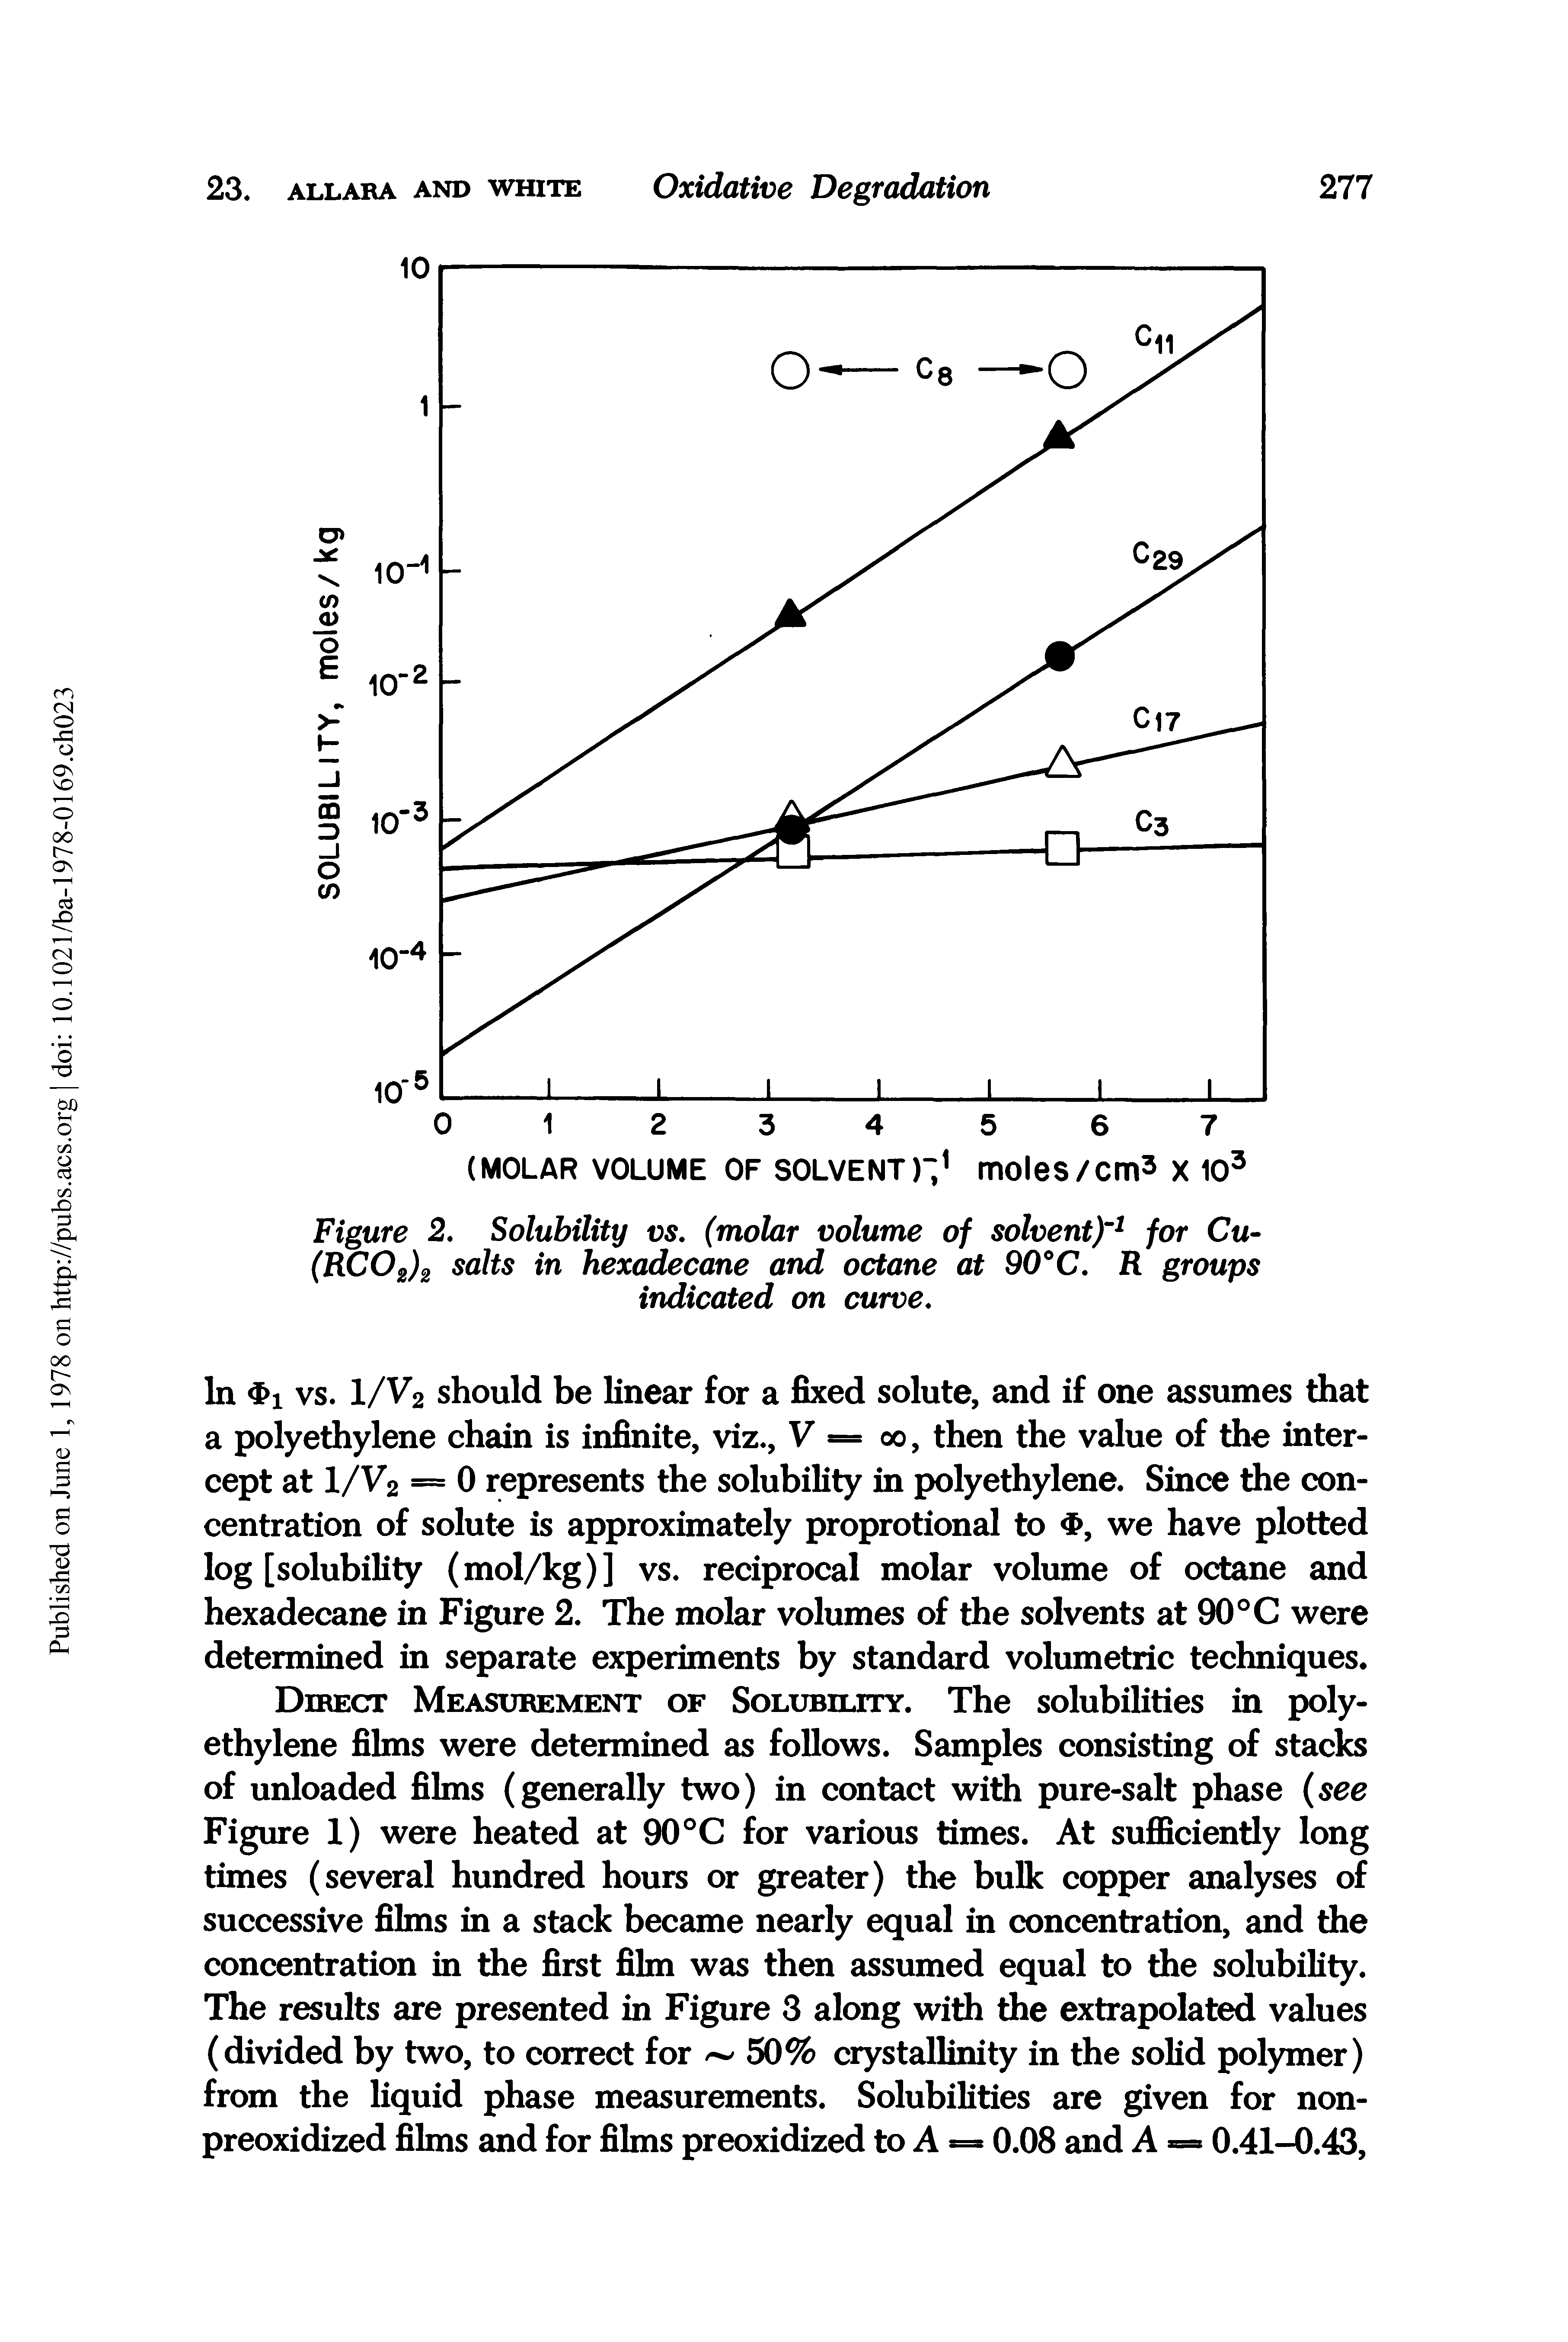 Figure 2. Solubility vs. (molar volume of solventY1 for Cu-(RC02)2 salts in hexadecane and octane at 90°C. R groups indicated on curve.